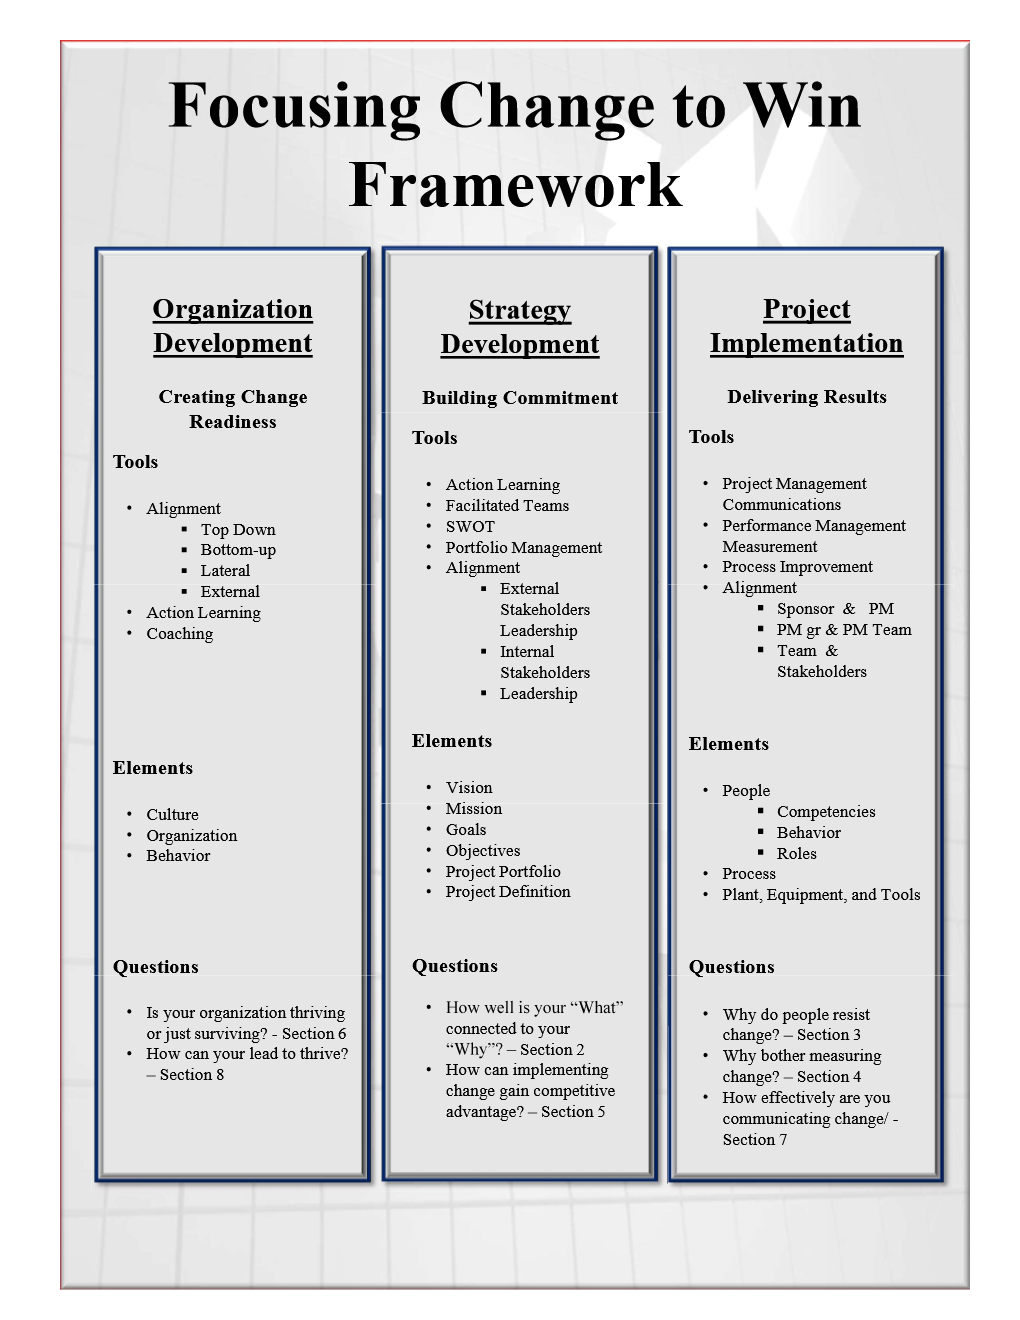 Focusing Change to Win Framework. Page 4 of 6